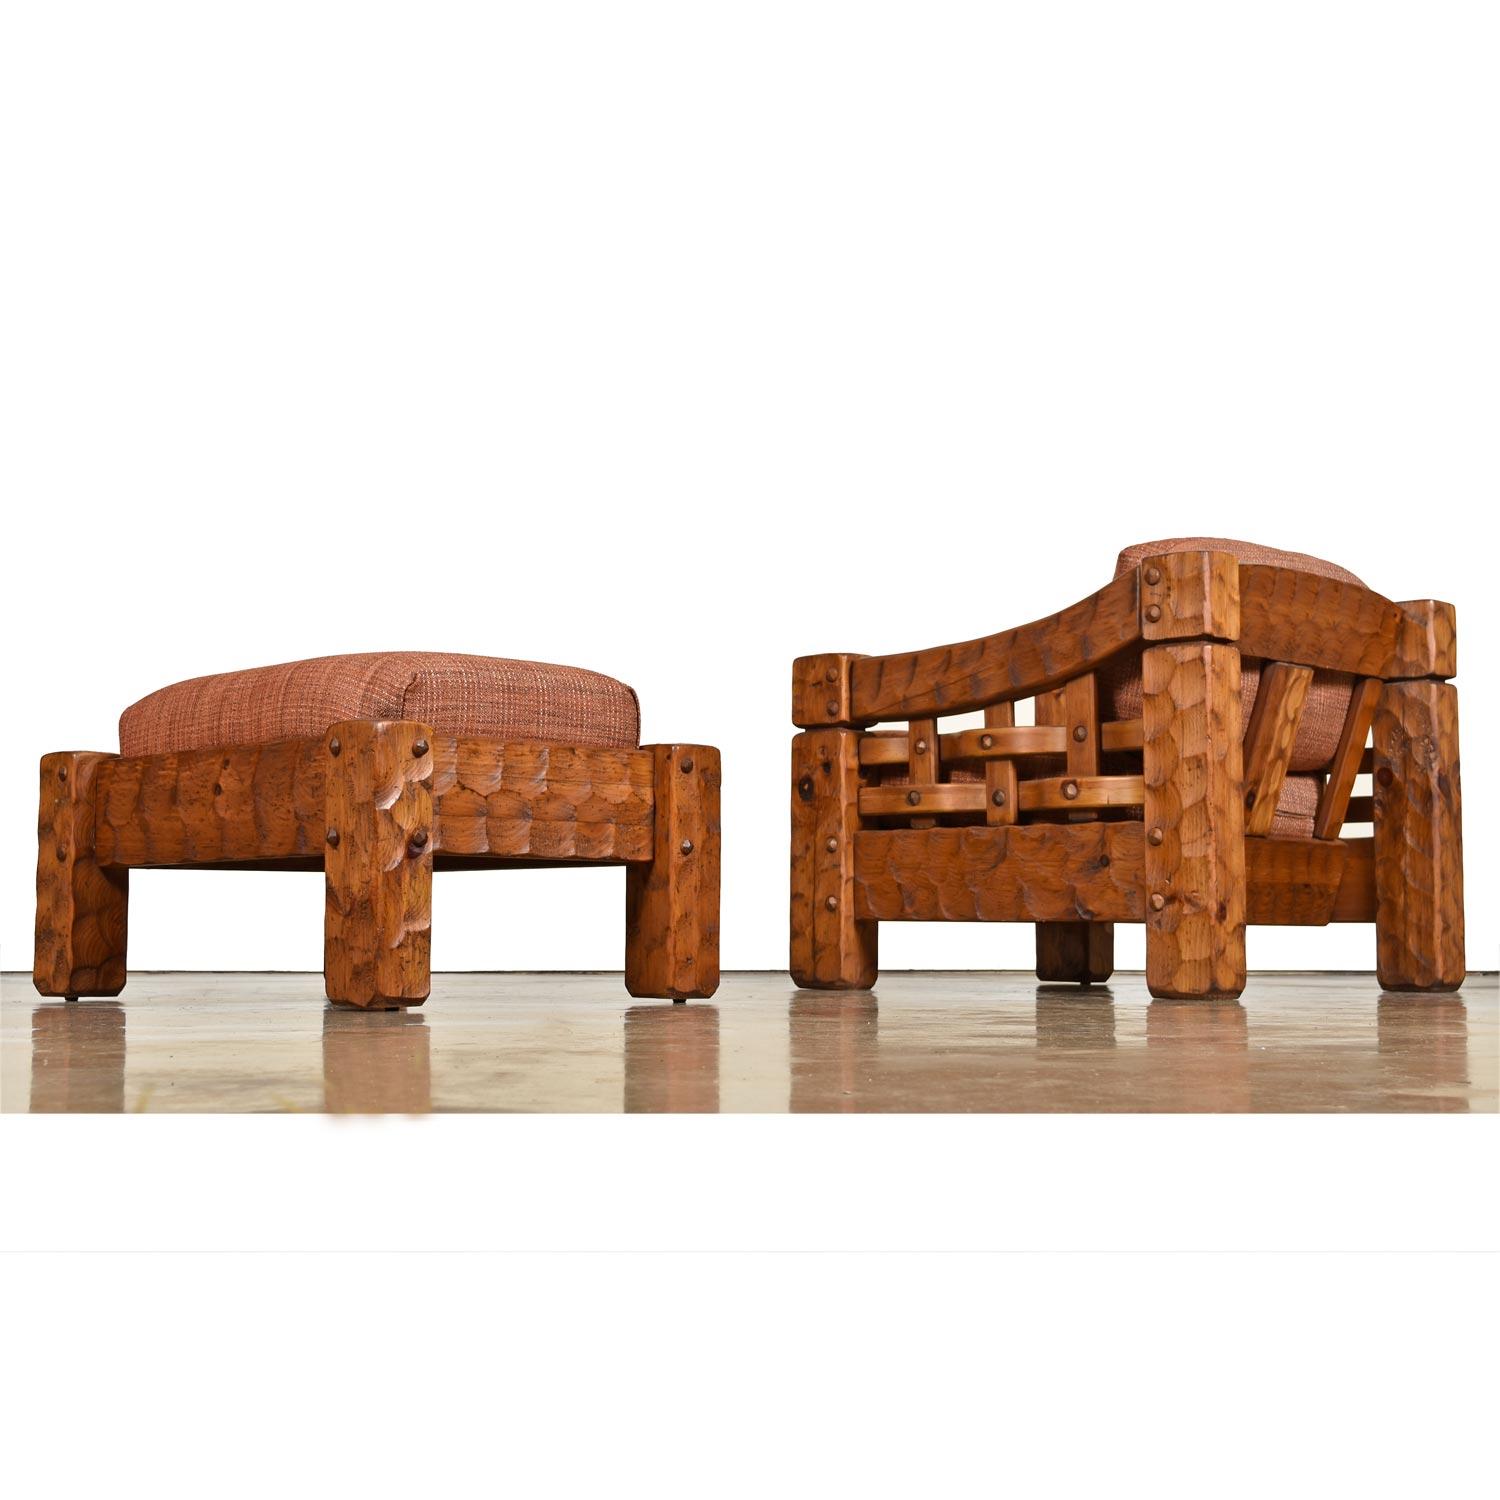 American Rustic Modern Solid Knotty Pine Cabin Lodge Lounge Chairs & Ottomans Set by Null